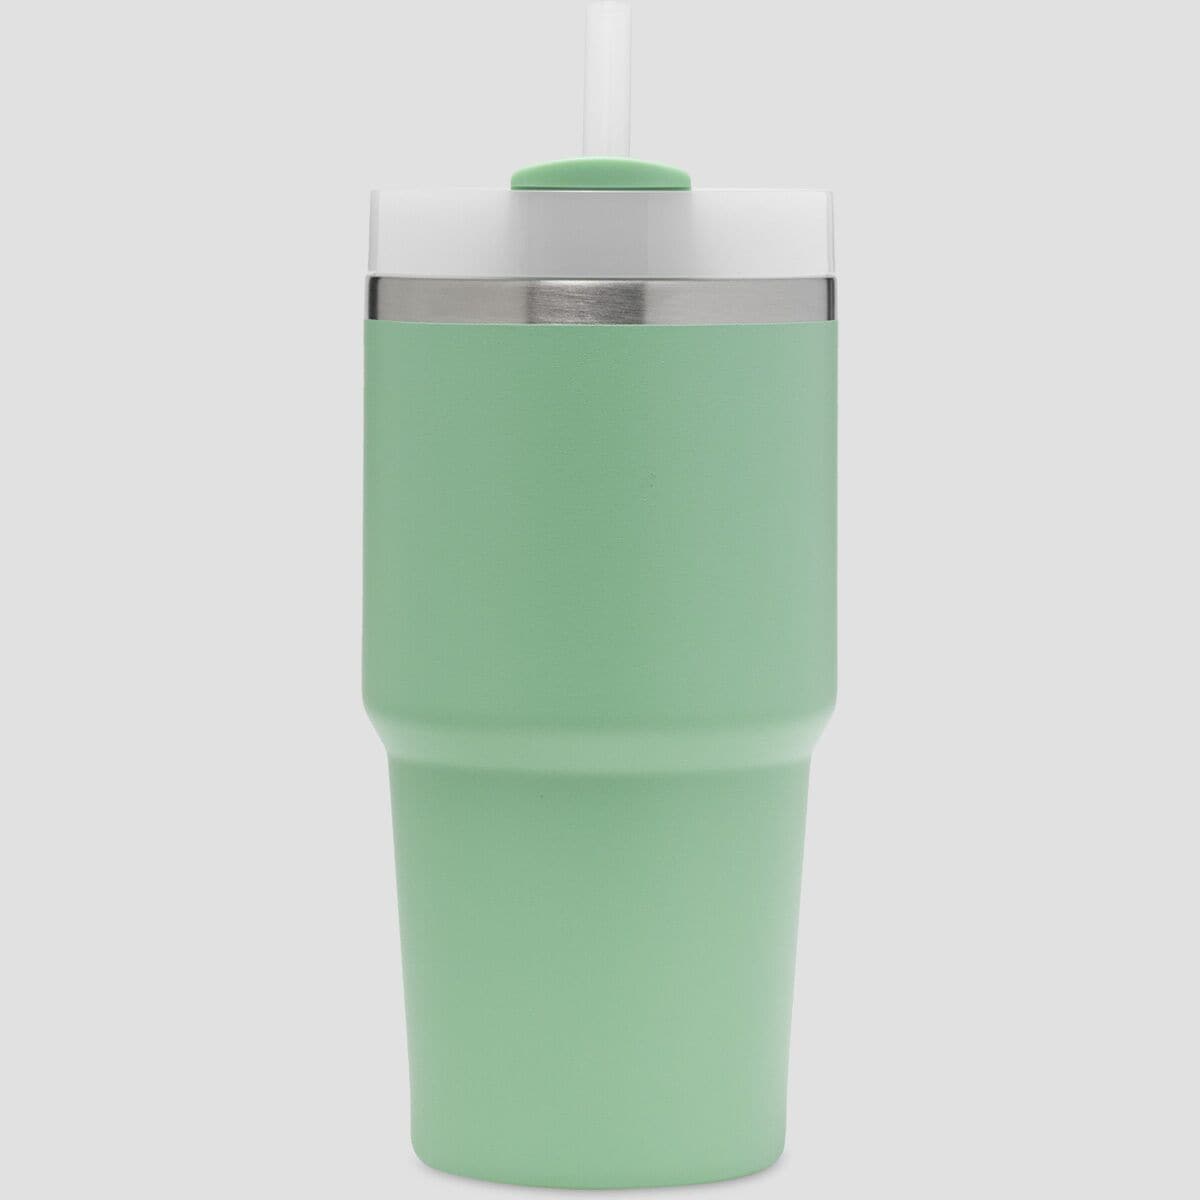 Outlet ❤️ Stanley The Quencher H2.0 FlowState™ Tumbler